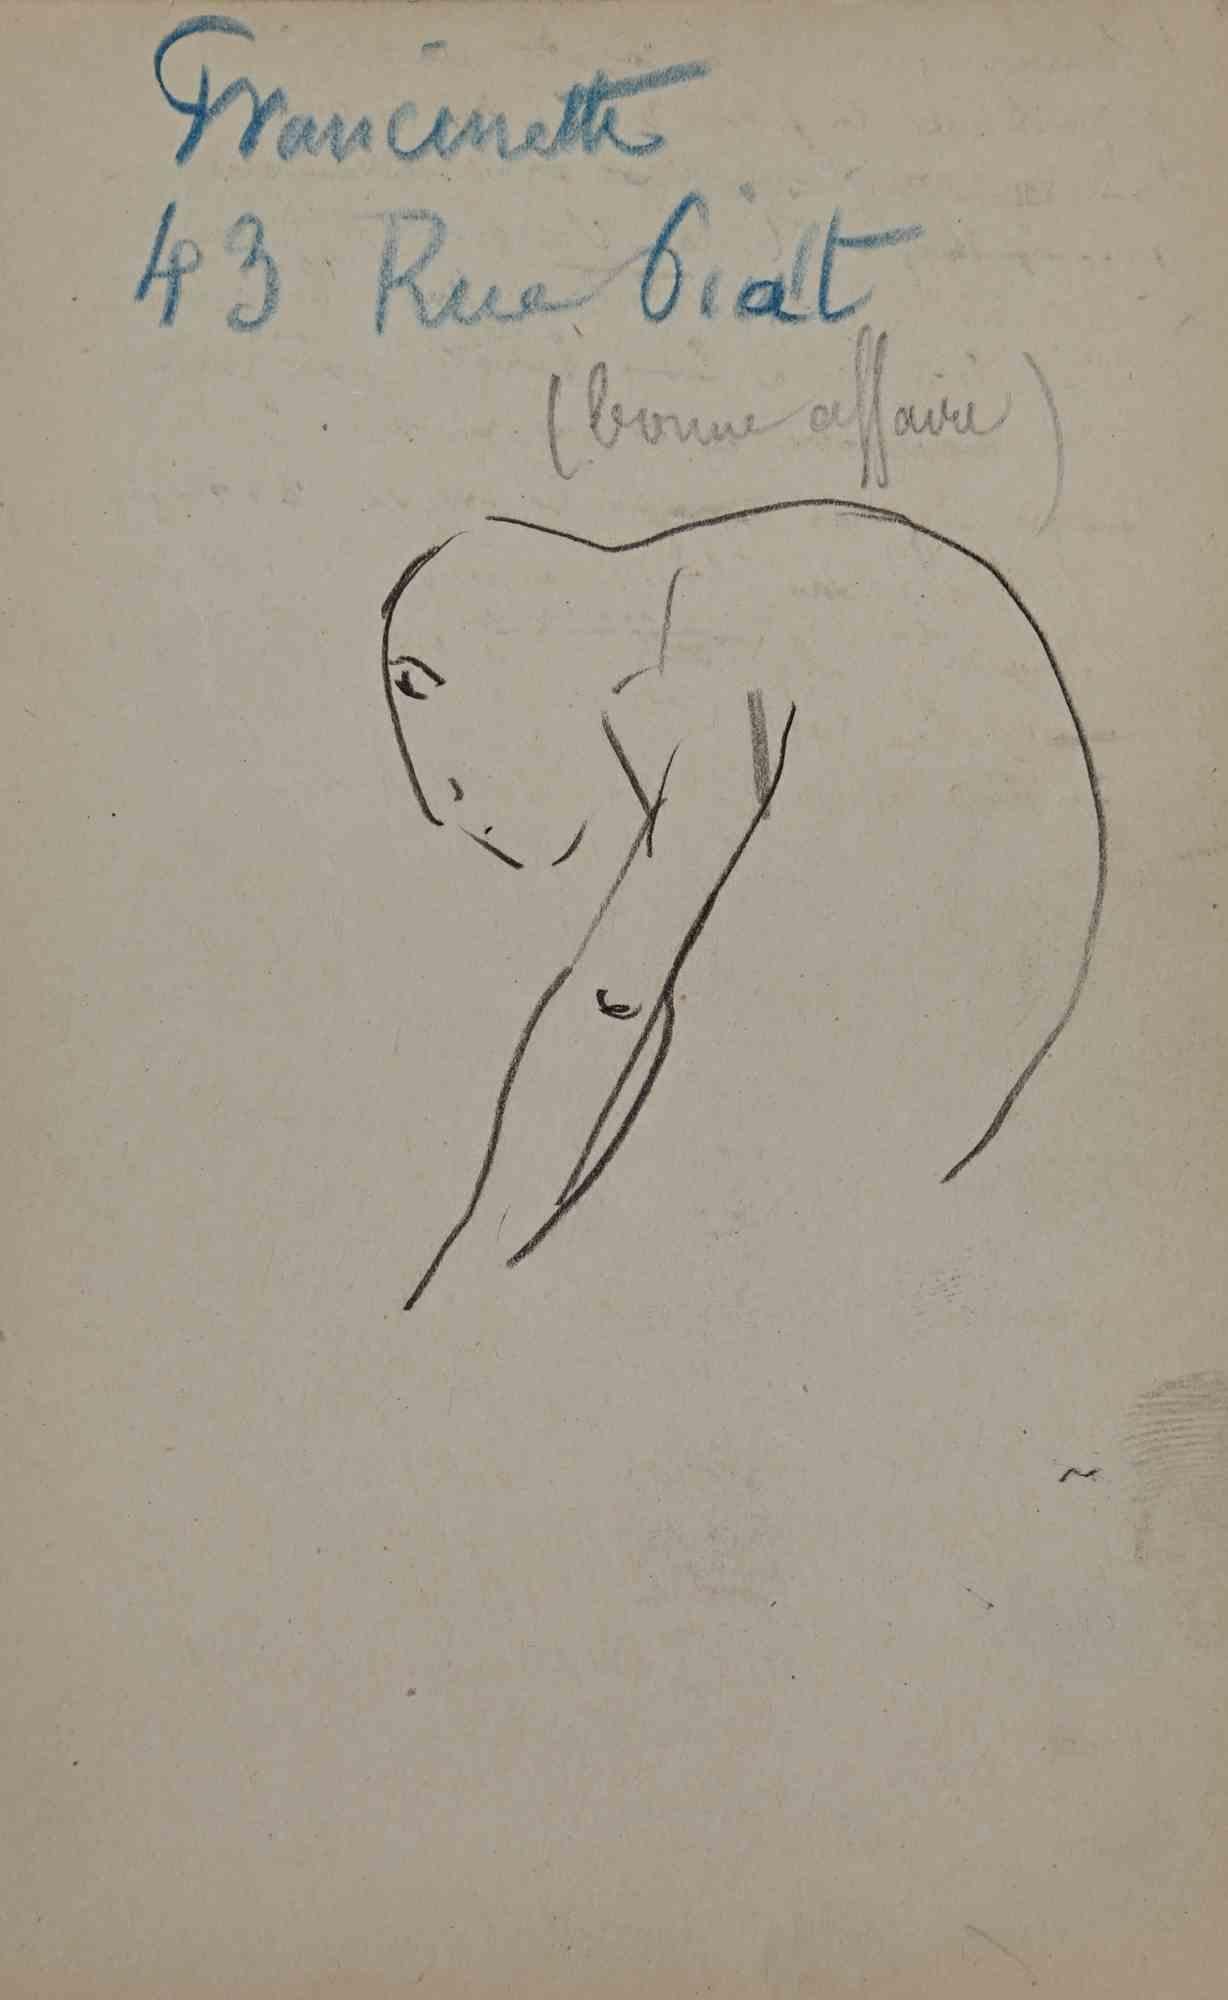 Figure is an original Drawing on paper realized by the painter Pierre Georges Jeanniot (1848-1934).

Drawing in Pencil.

Good conditions except for aged margins.

The artwork is represented through deft and quick strokes by mastery. Pierre-Georges